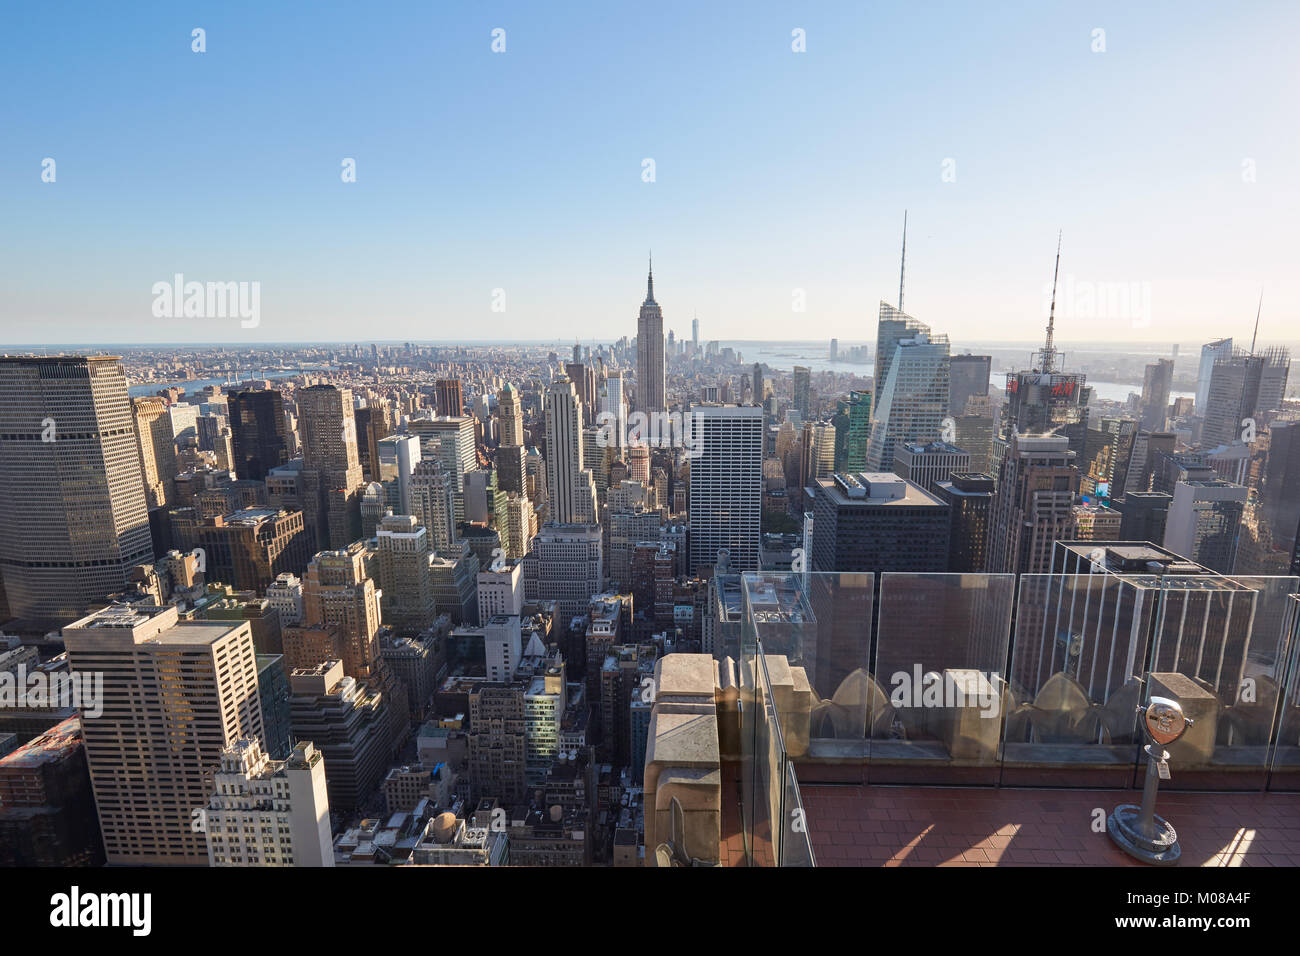 NEW YORK - SEPTEMBER 12: Rockefeller Center observation deck, city and skyline view in a clear sunny day, nobody on September 12, 2016 in New York Stock Photo